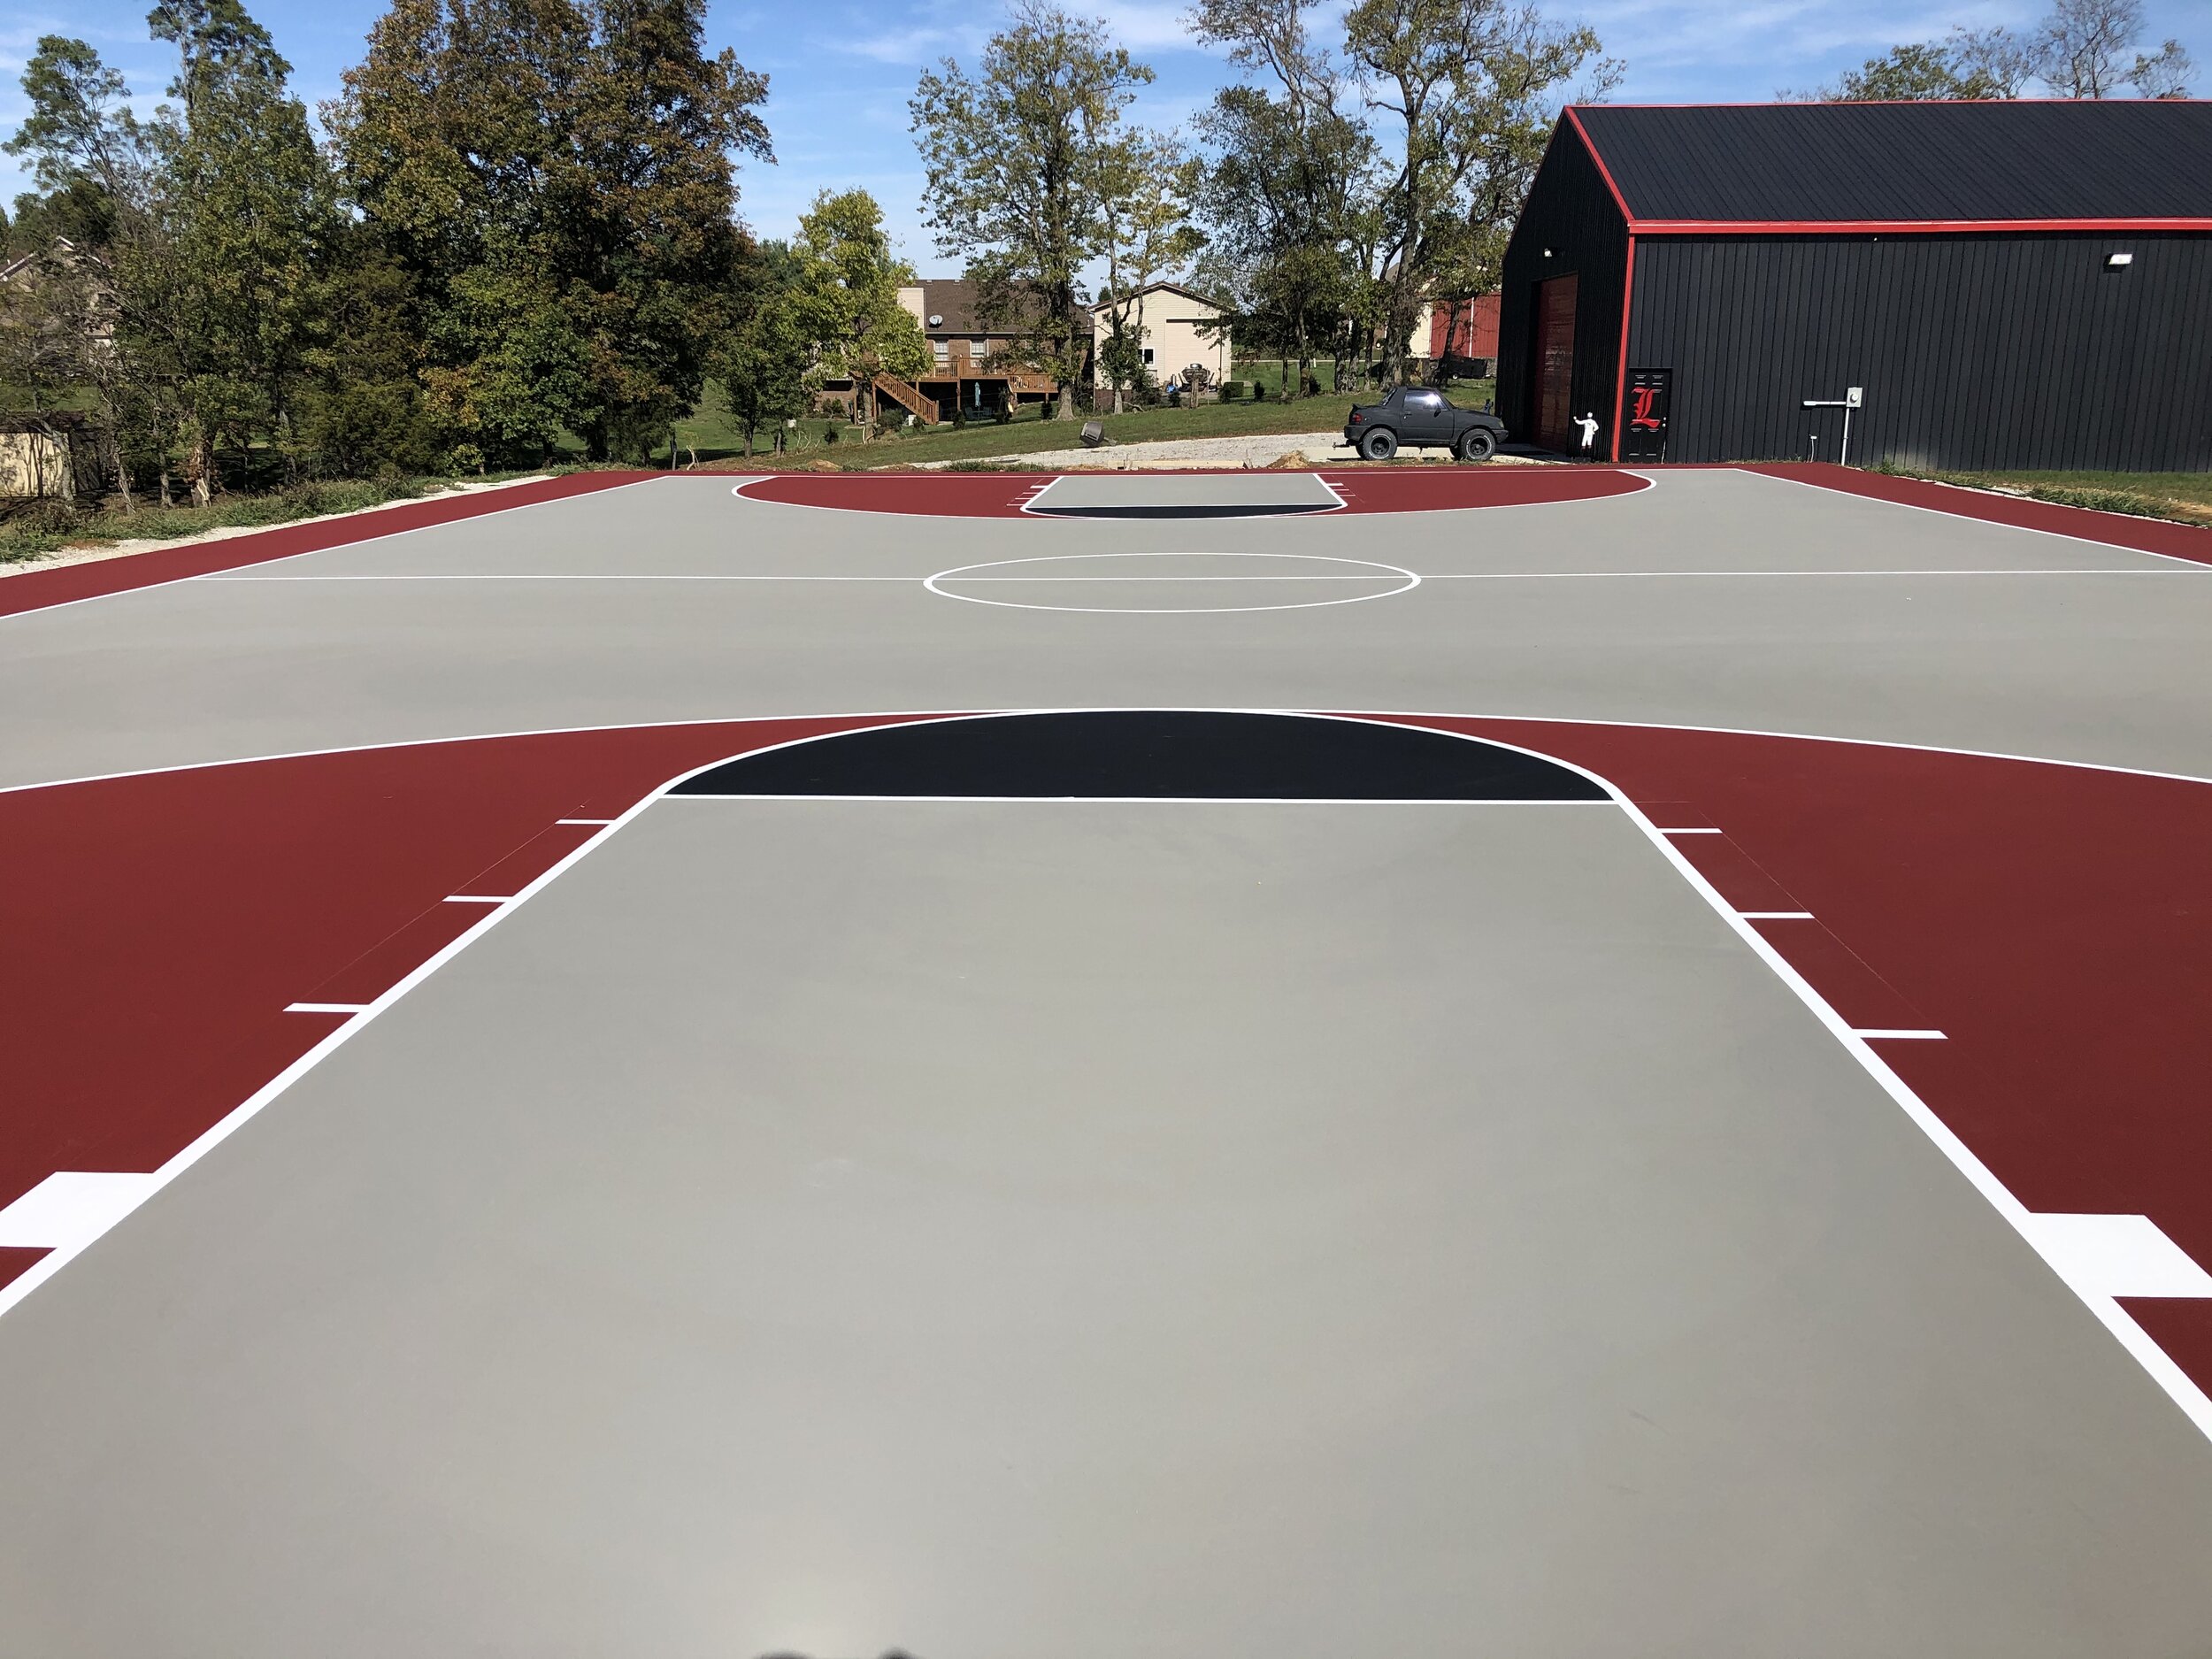 Red and Gray Outdoor Basketball Court.JPG